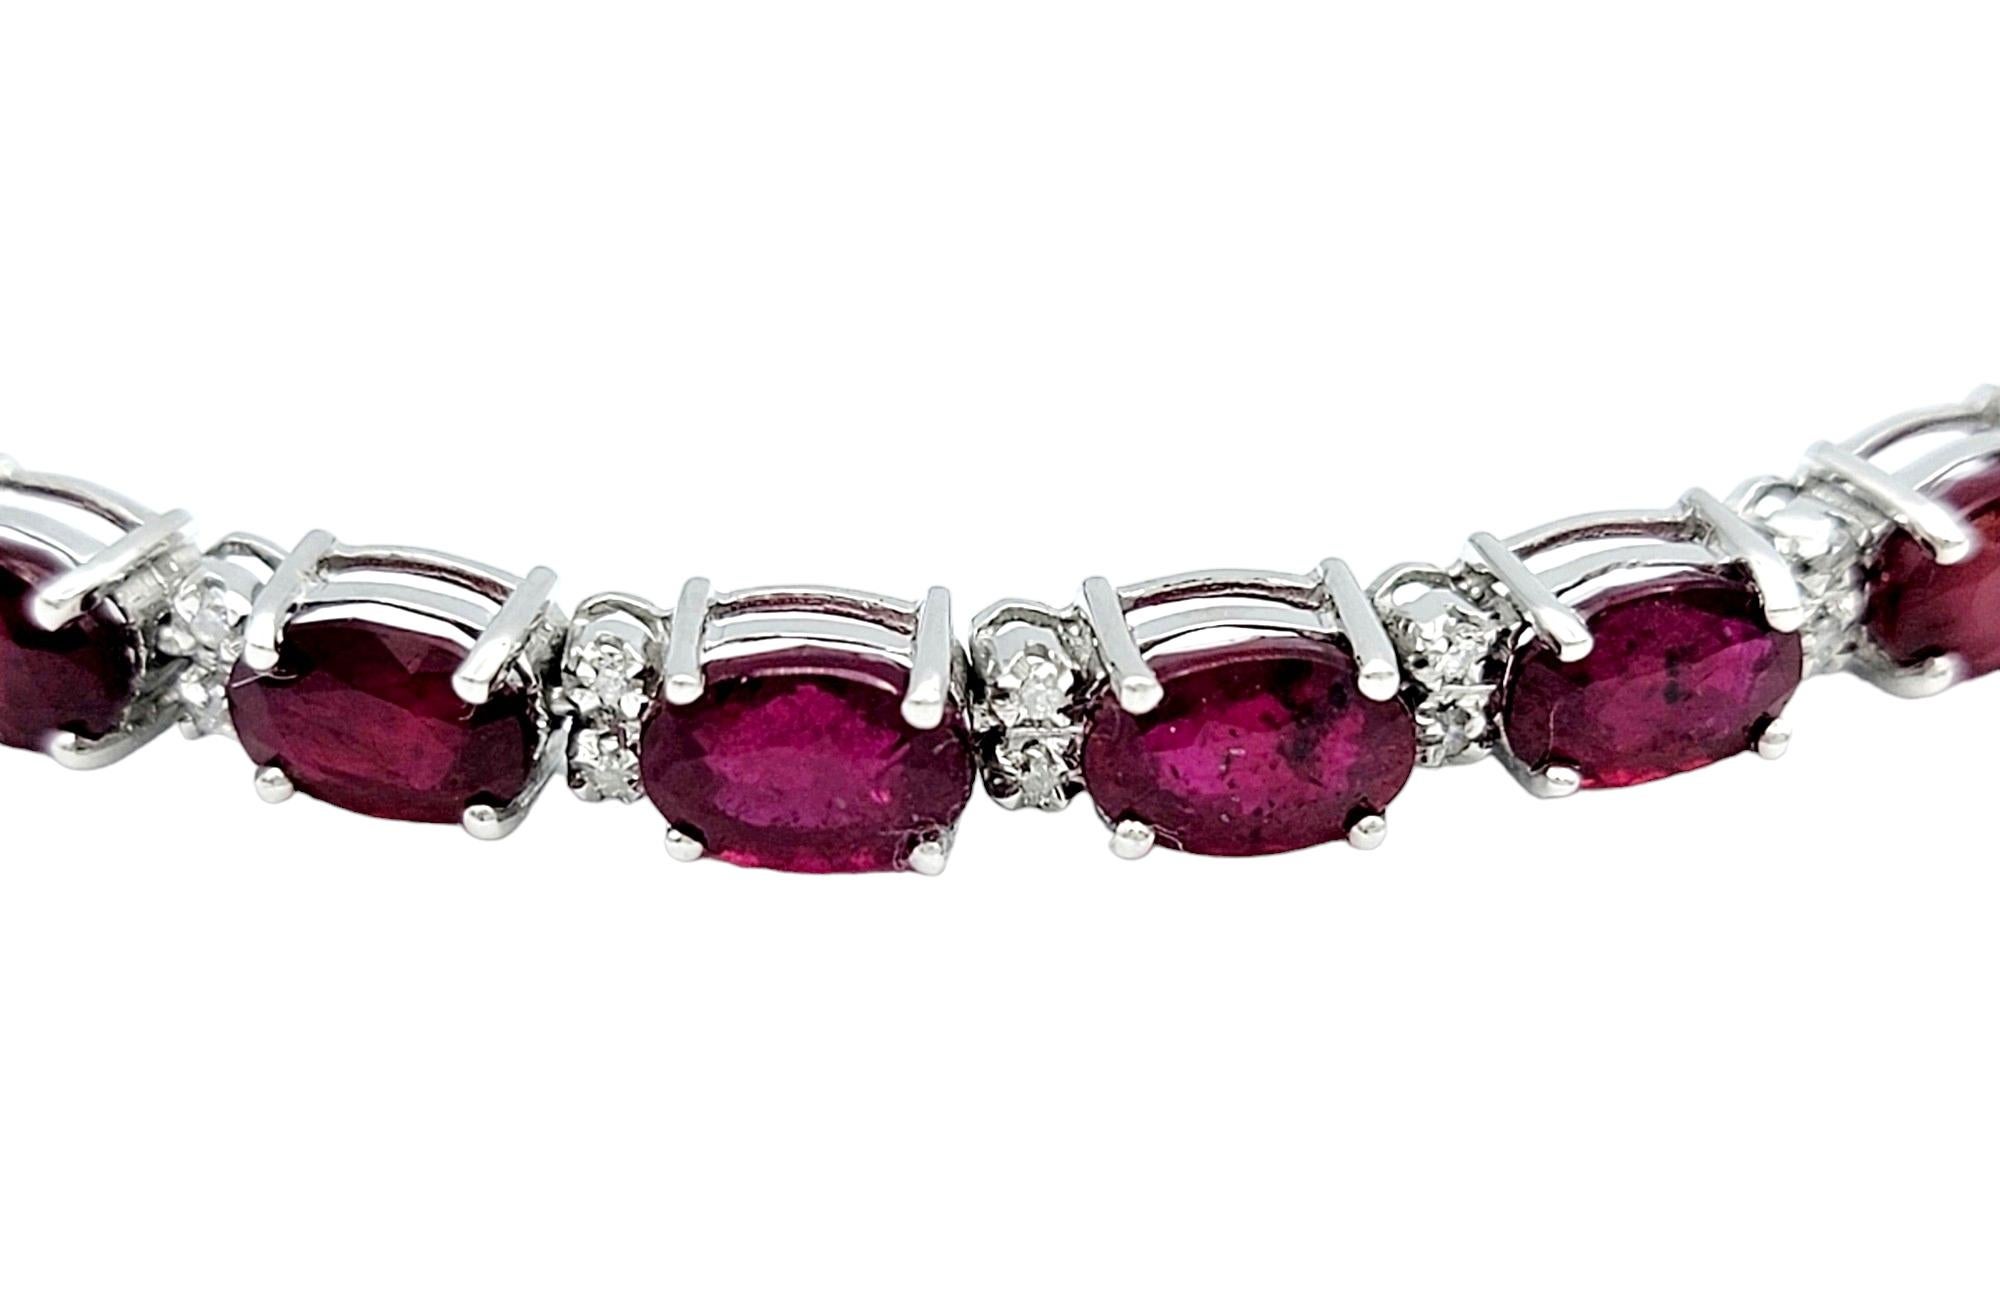 This exquisite allure of this ruby and diamond tennis bracelet, a harmonious symphony of gemstones set in the timeless embrace of 14 karat white gold, is sure to impress. The alternating arrangement of horizontal-set oval rubies and round diamonds